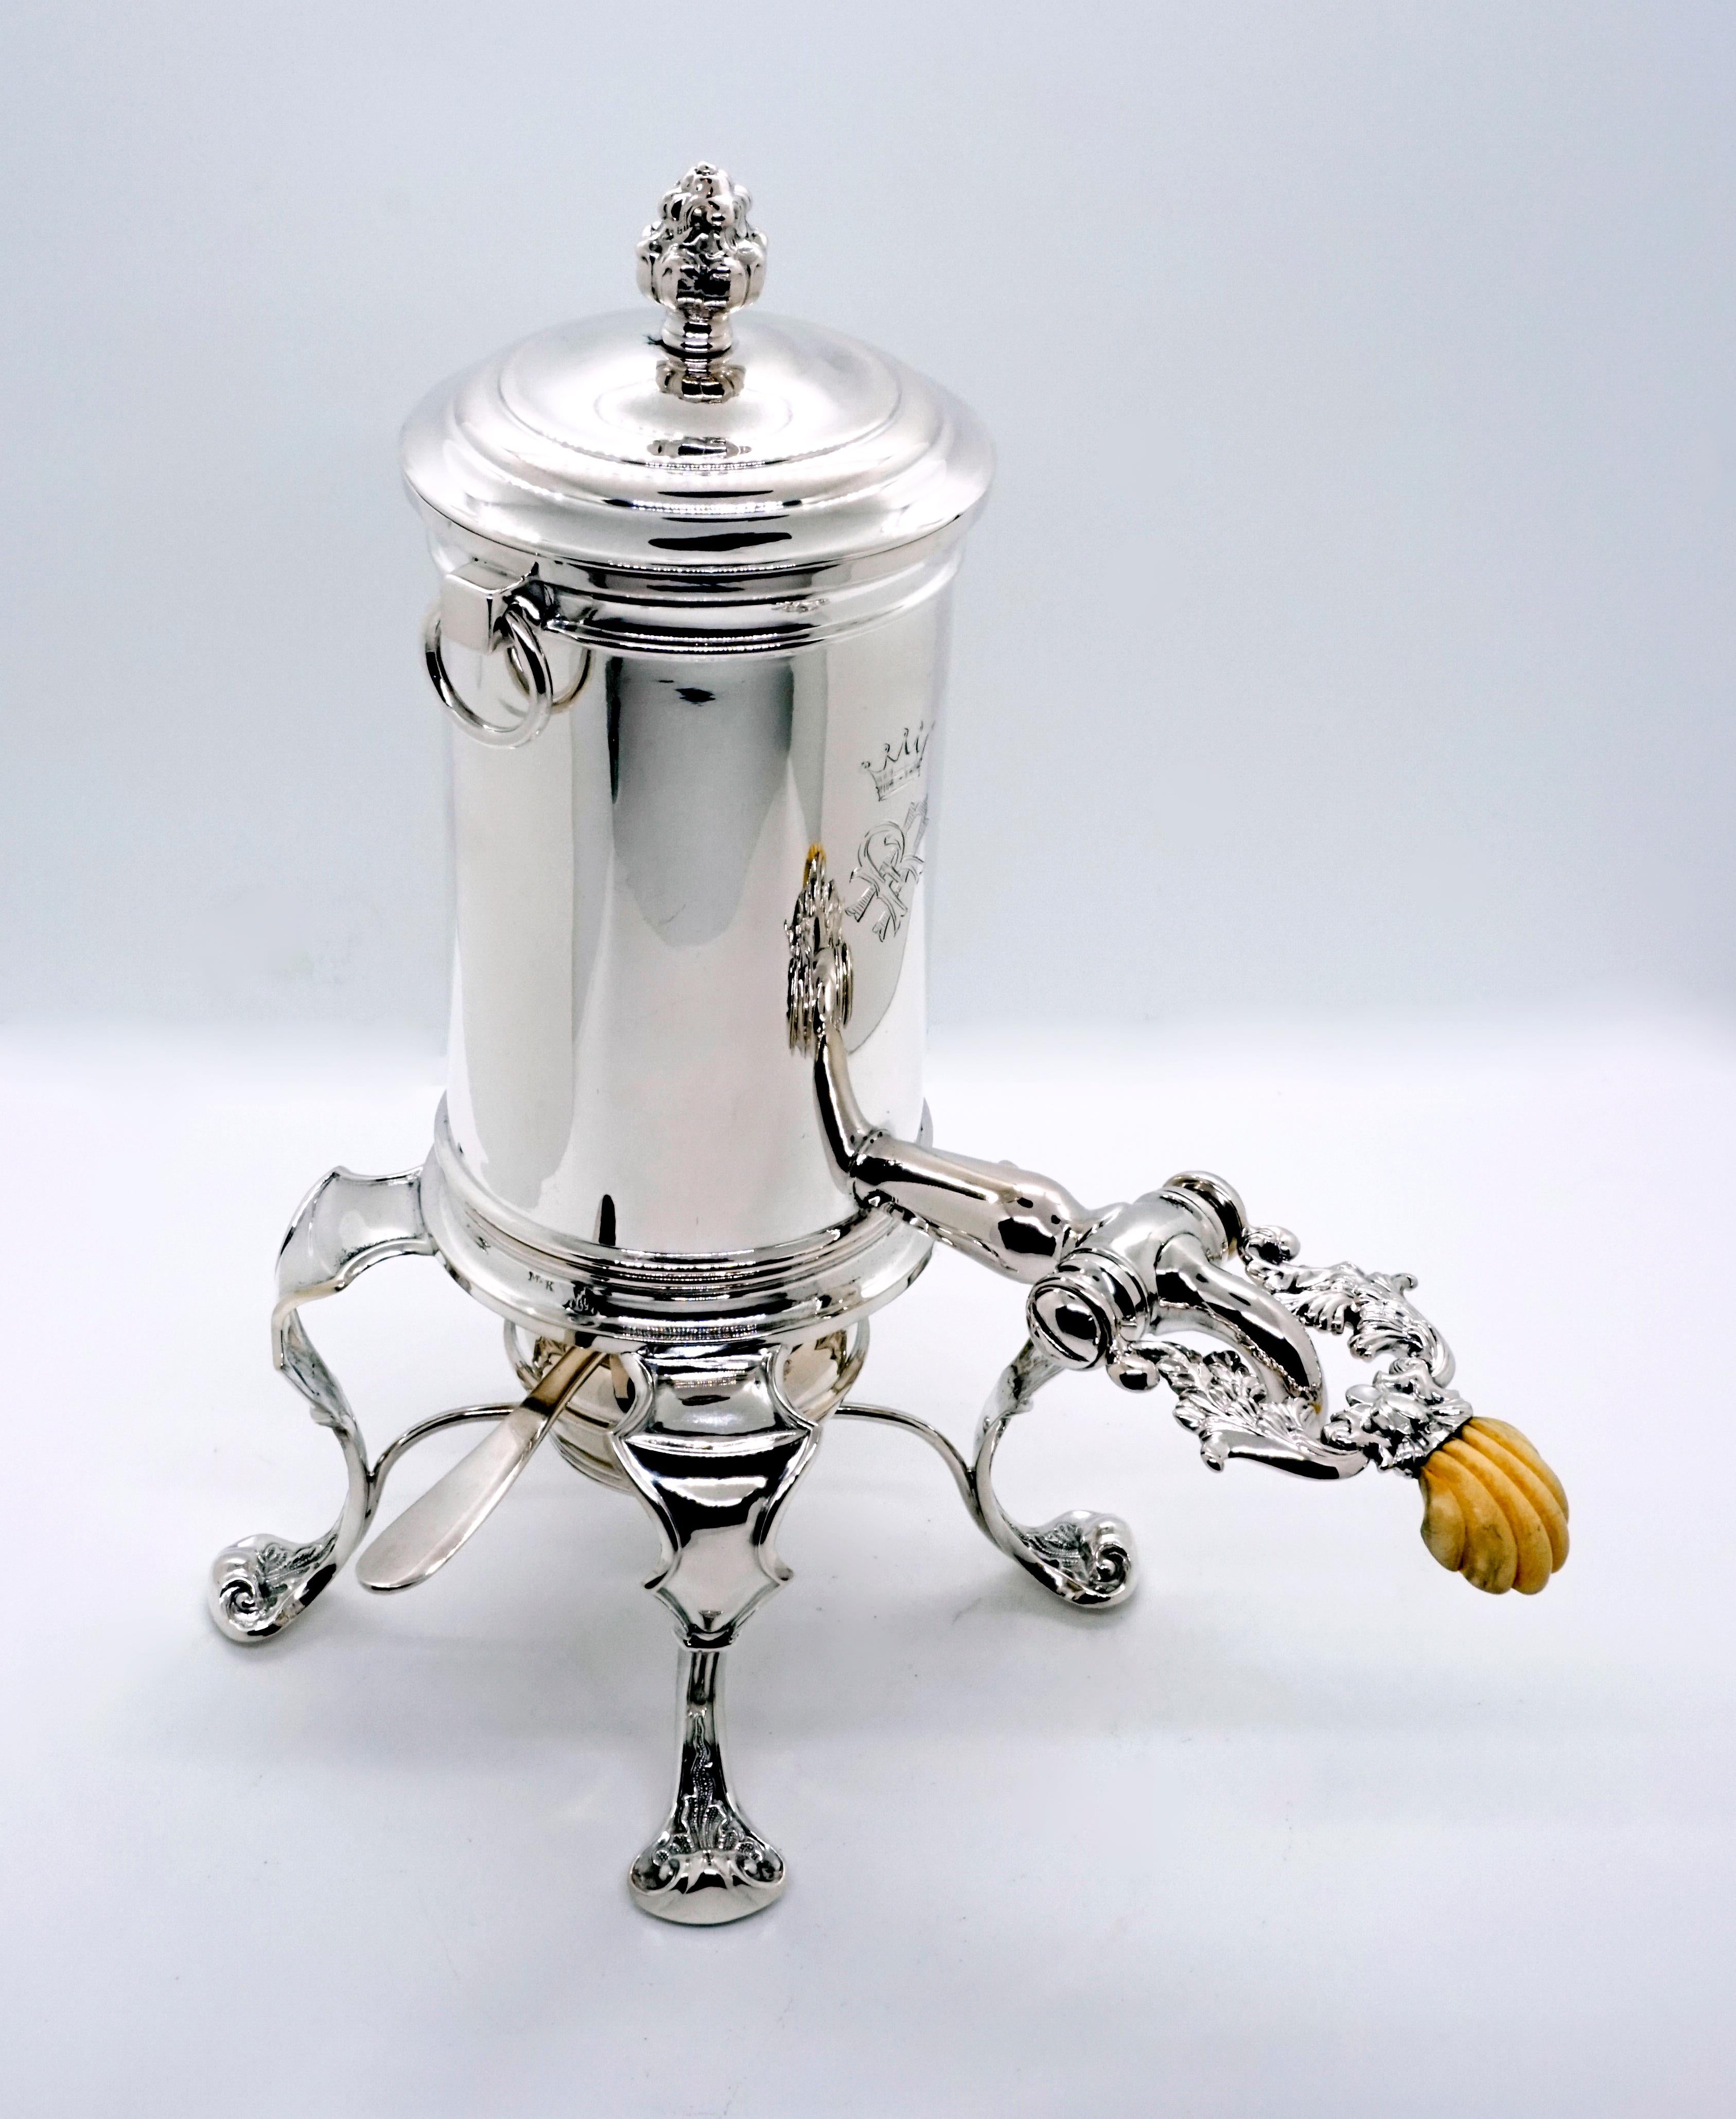 Consists of a hot water vessel with a lockable spout, two metal sieves, a silver warmer and a burner.
Cylindrical vessel with two drop ring handles, removable lid with acanthus knob, pouring lever with acanthus decoration and handle in the shape of